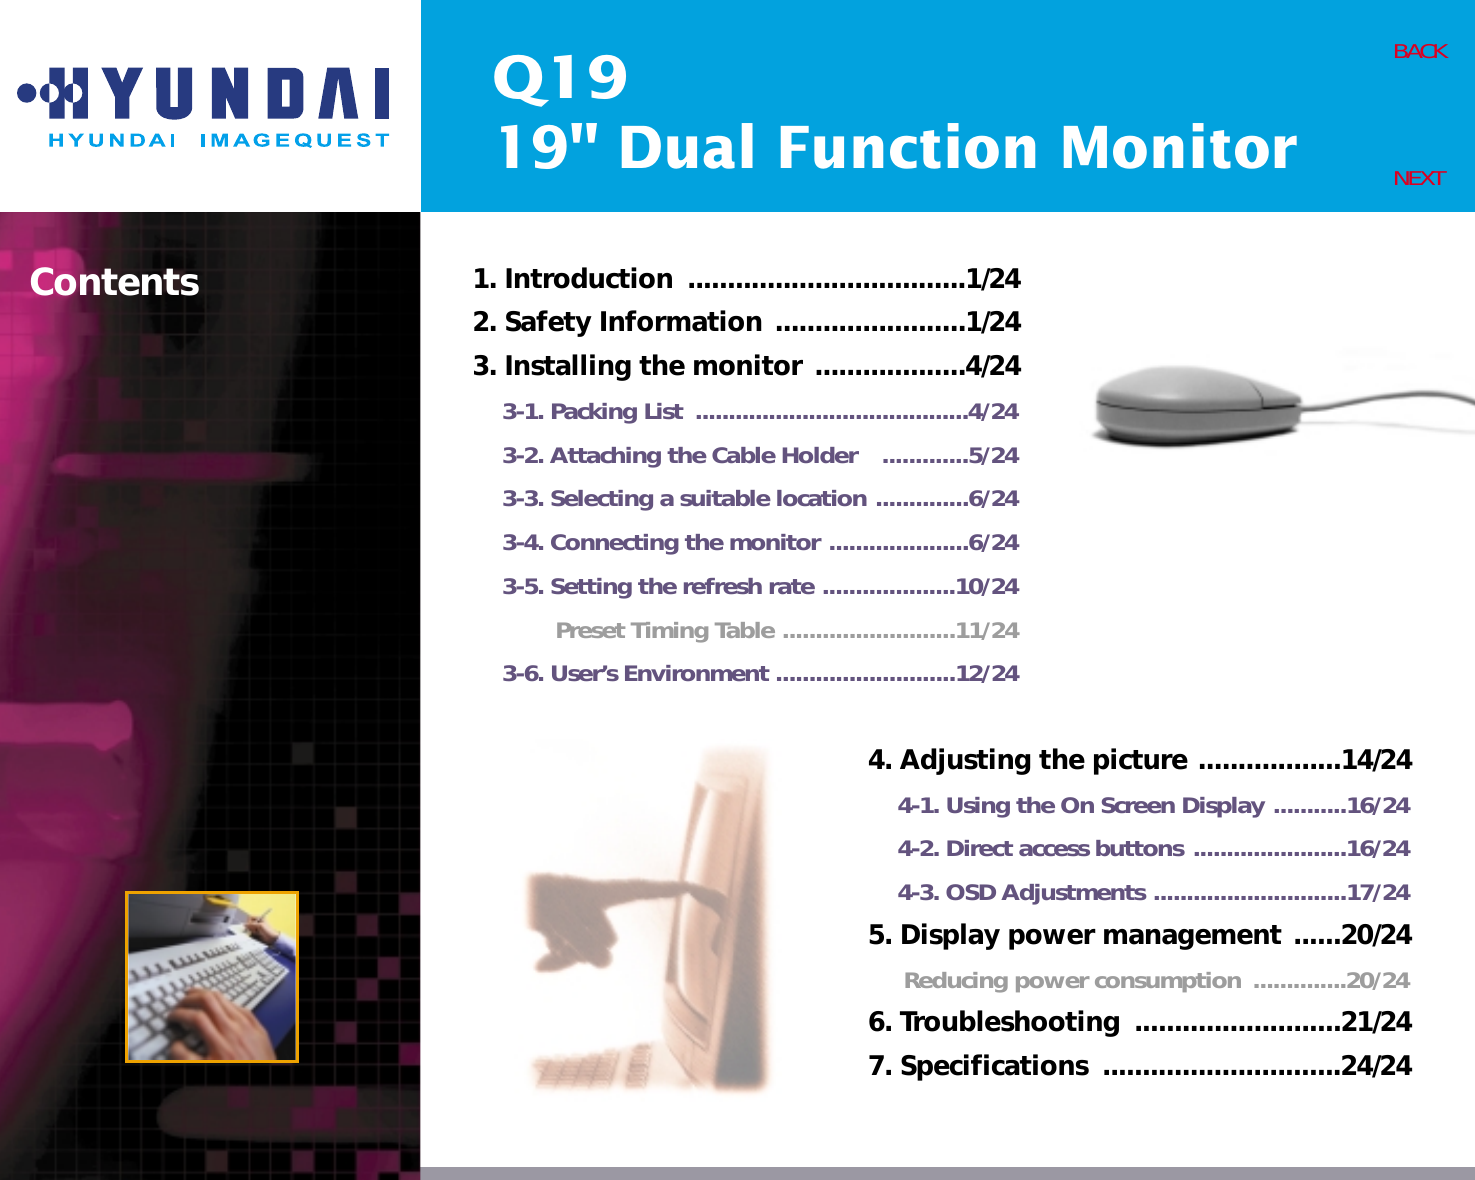 Q1919&quot; Dual Function MonitorContents 1. Introduction  ...................................1/242. Safety Information ........................1/243. Installing the monitor ...................4/243-1. Packing List  .........................................4/243-2. Attaching the Cable Holder   .............5/243-3. Selecting a suitable location ..............6/243-4. Connecting the monitor .....................6/243-5. Setting the refresh rate ....................10/24Preset Timing Table ..........................11/243-6. User’s Environment ...........................12/24BACKNEXT4. Adjusting the picture ..................14/244-1. Using the On Screen Display ...........16/244-2. Direct access buttons .......................16/244-3. OSD Adjustments .............................17/245. Display power management ......20/24Reducing power consumption  ..............20/246. Troubleshooting  ..........................21/247. Specifications  ..............................24/24